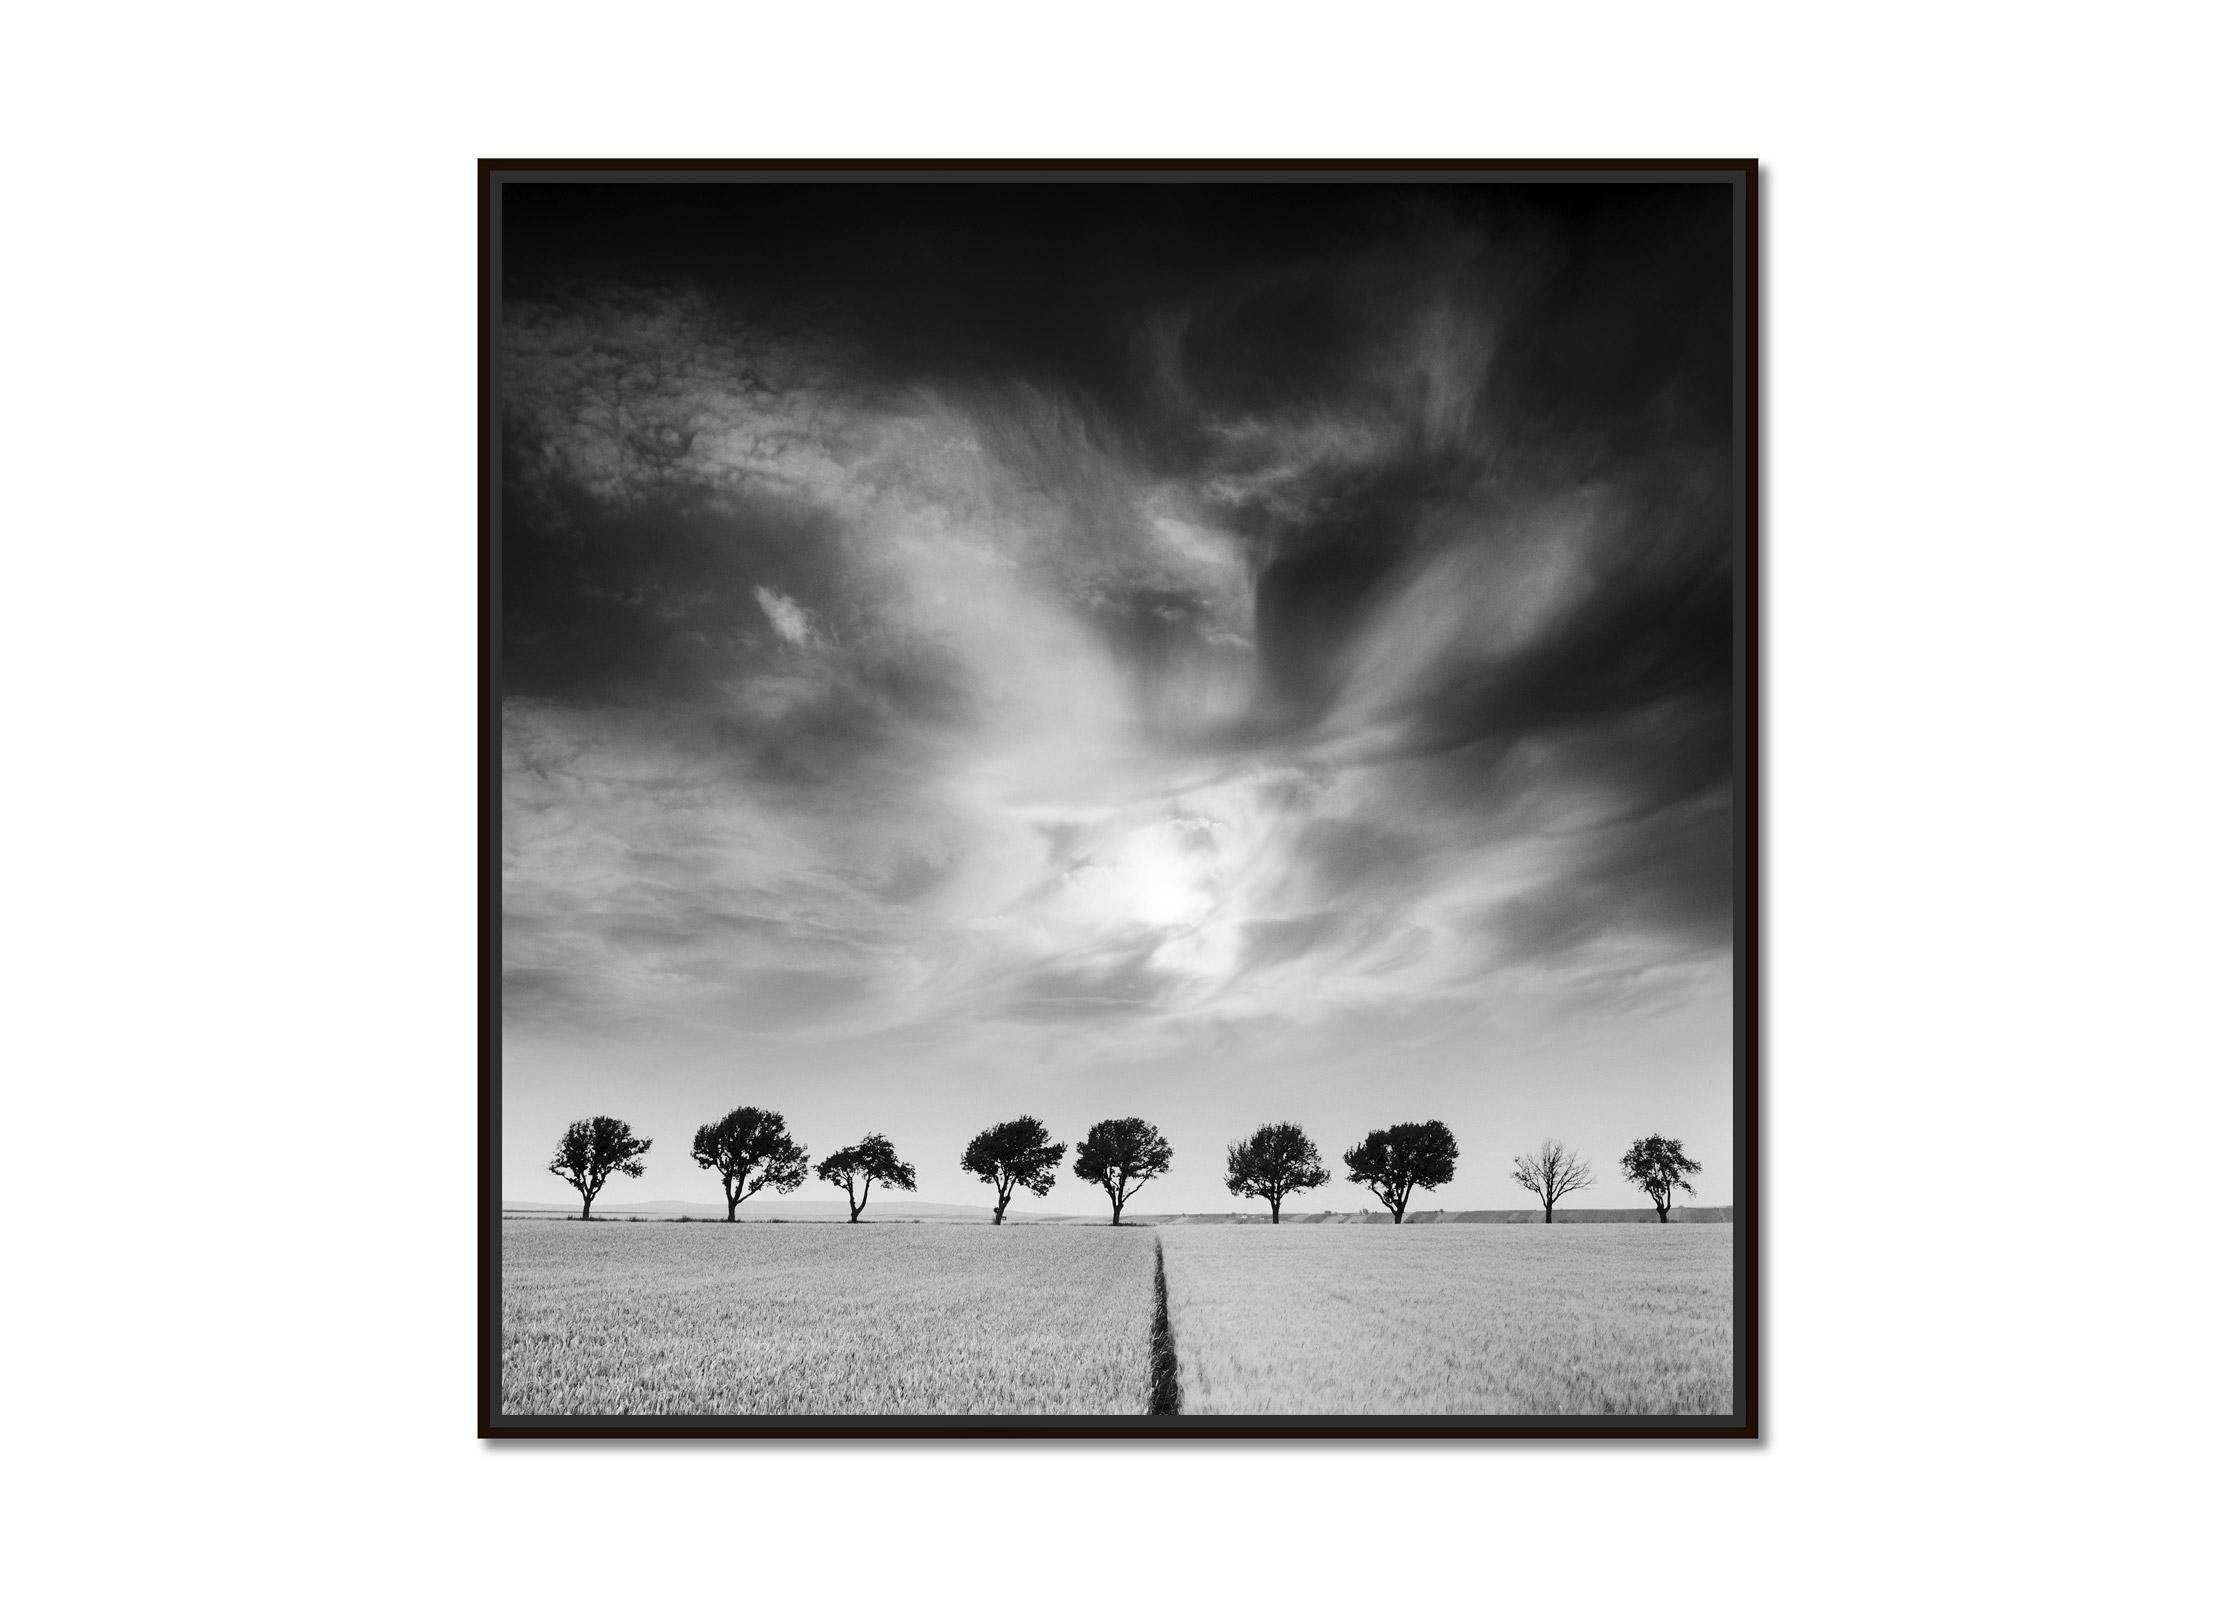 Cherry Trees and Dark Sky, Austria, black and white, art photography, landscape - Photograph by Gerald Berghammer